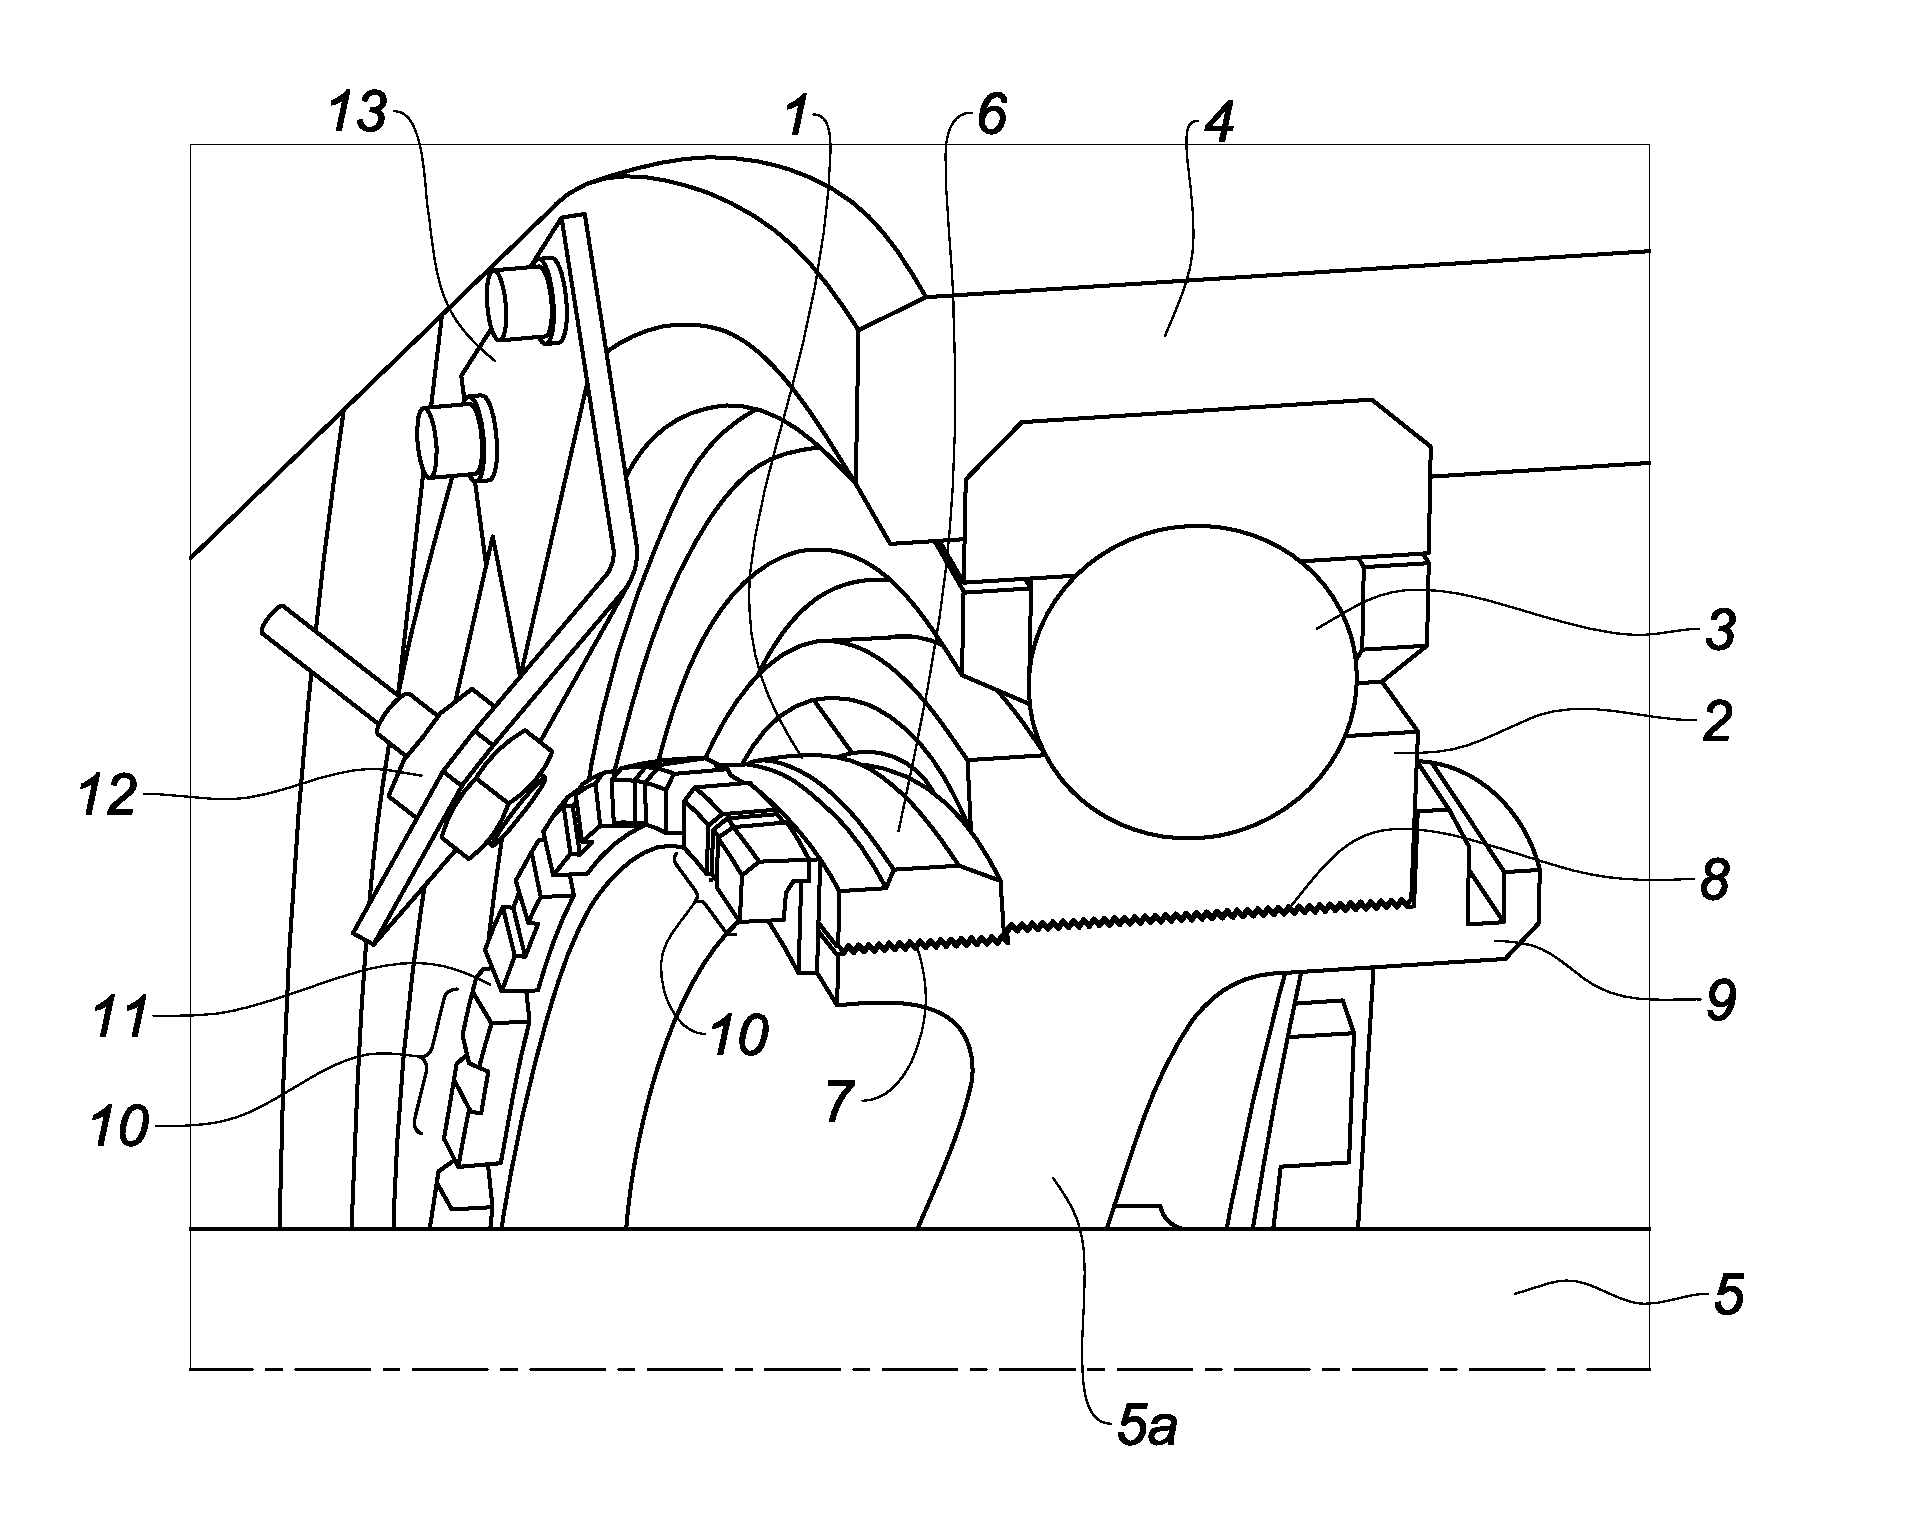 Bearing nut for measuring the rotational speed of a shaft connected to a turbomachine and associated measuring device